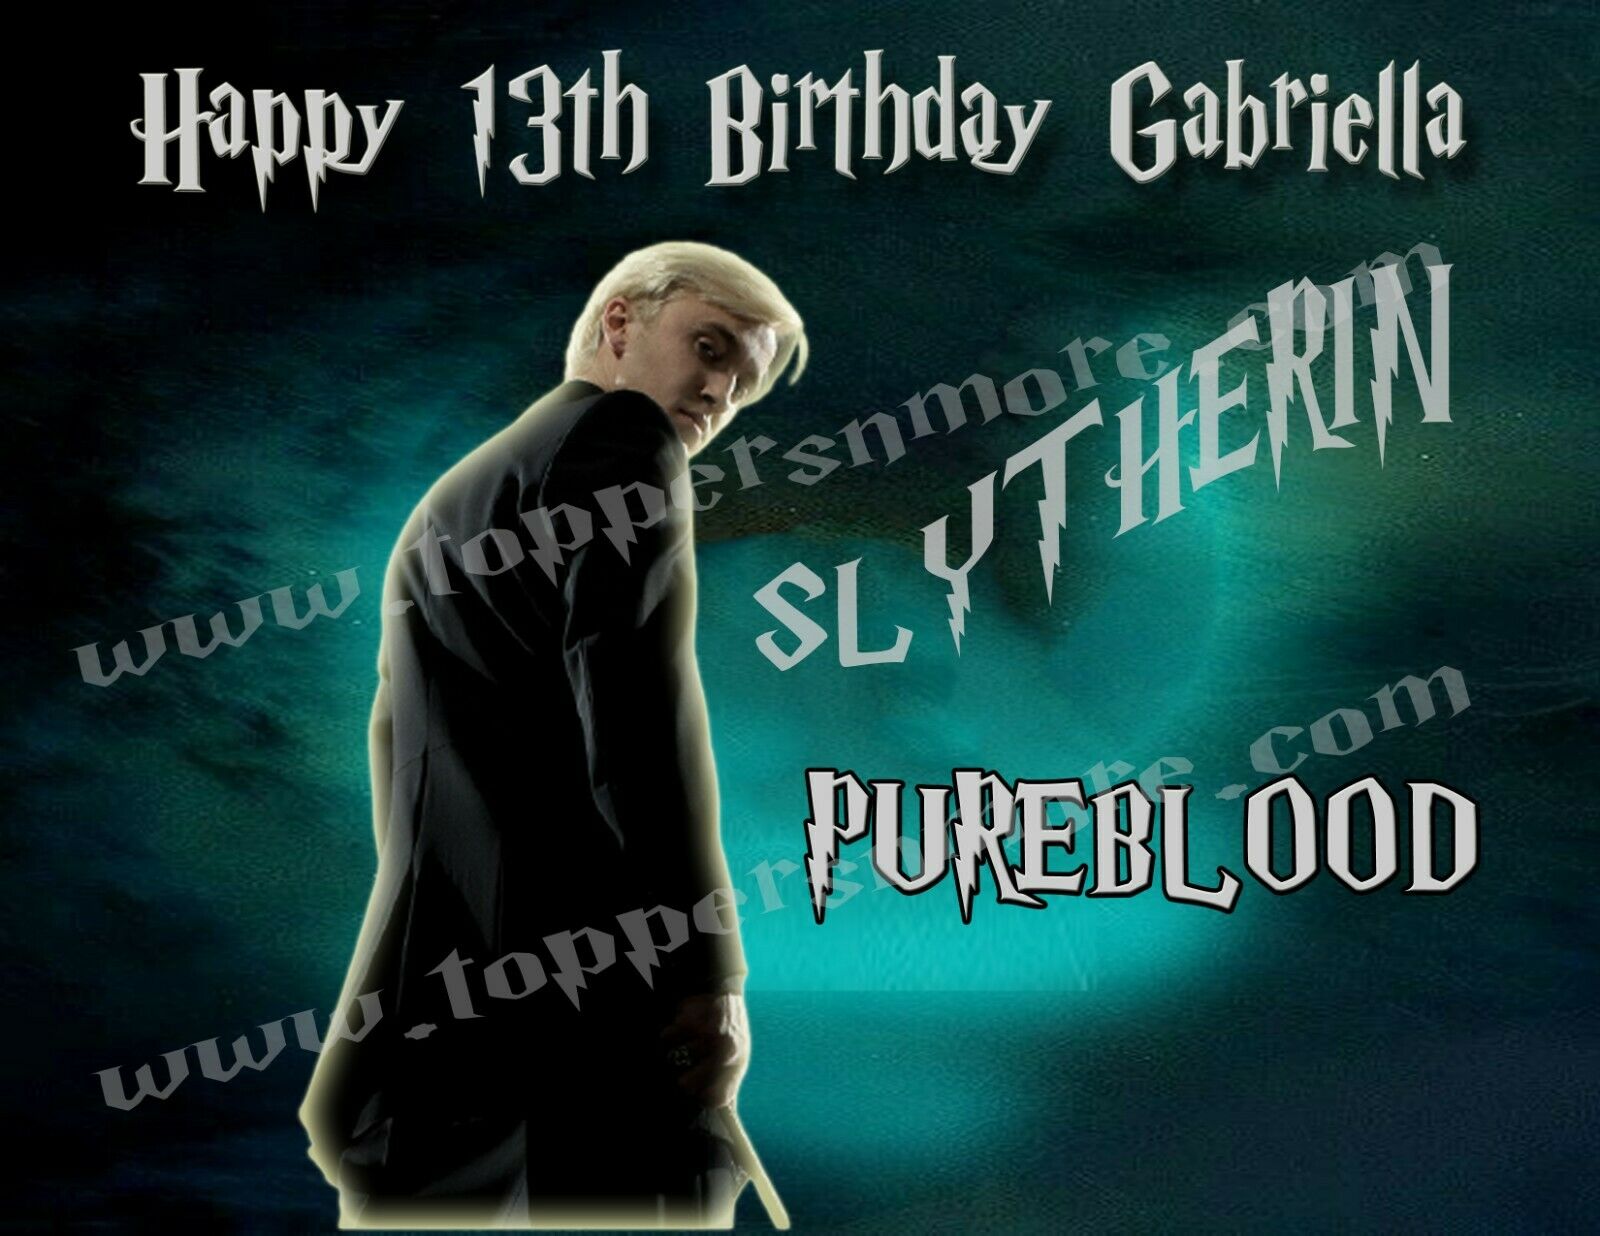 Draco Malfoy Slytherin Personalized Edible Print Premium Cake Toppers Frosting Sheets 5 Sizes